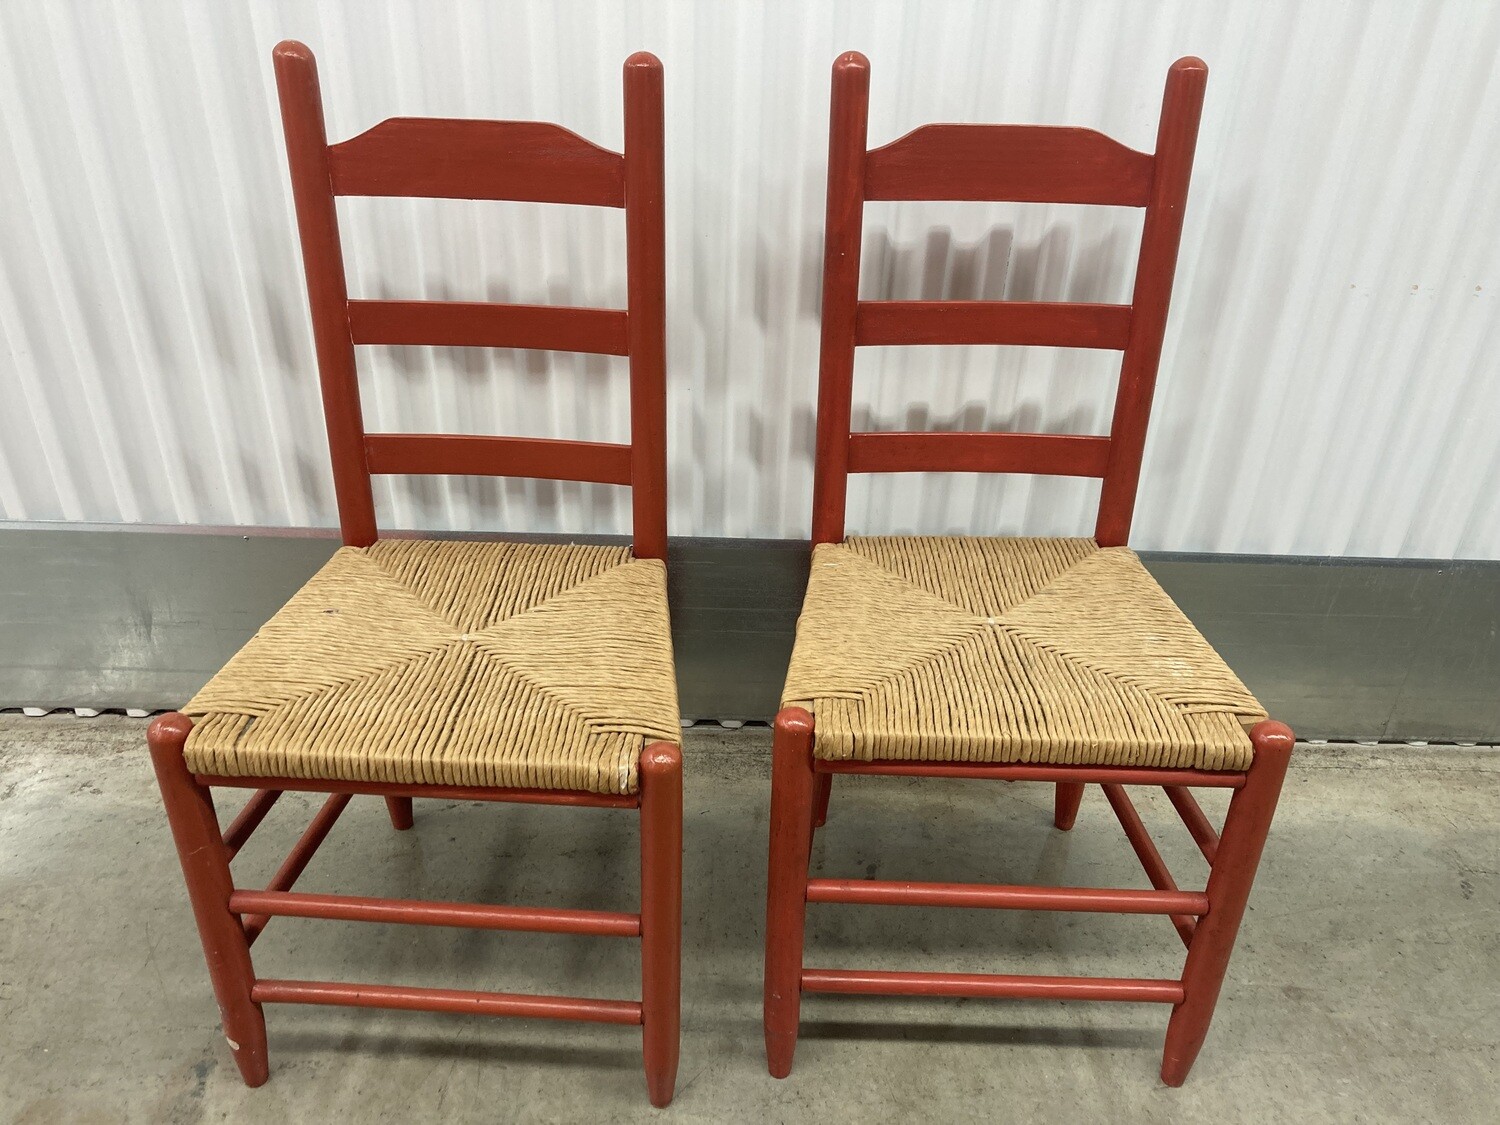 Pair of Ladderback Chairs, orange-red #2213 ** moved to family 11/7/23, listed for 8 mos.